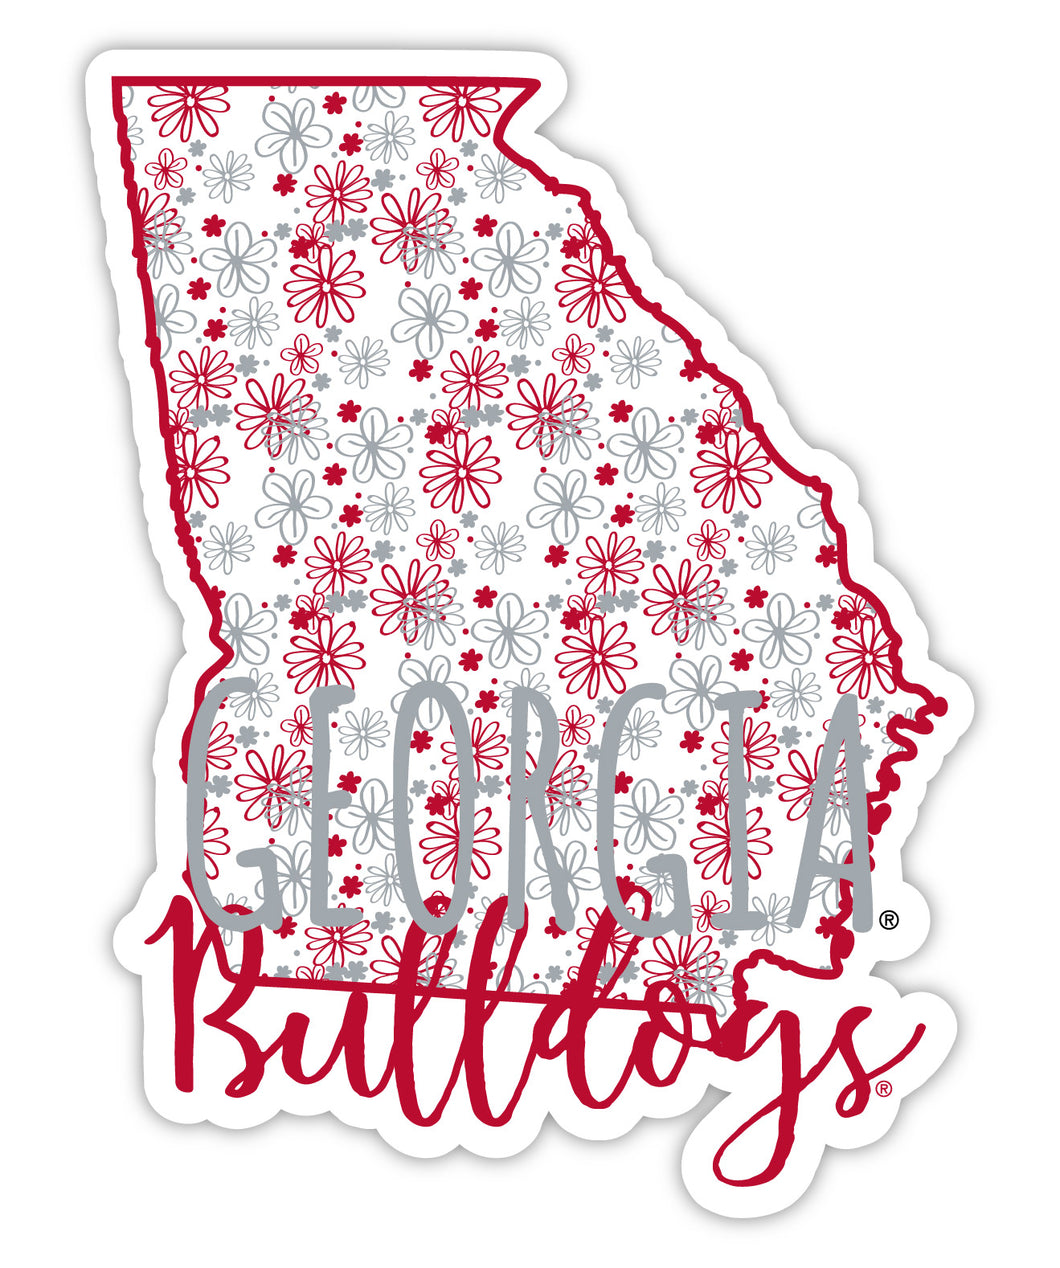 Georgia Bulldogs 2-Inch on one of its sides Floral Design NCAA Floral Love Vinyl Sticker - Blossoming School Spirit Decal Sticker